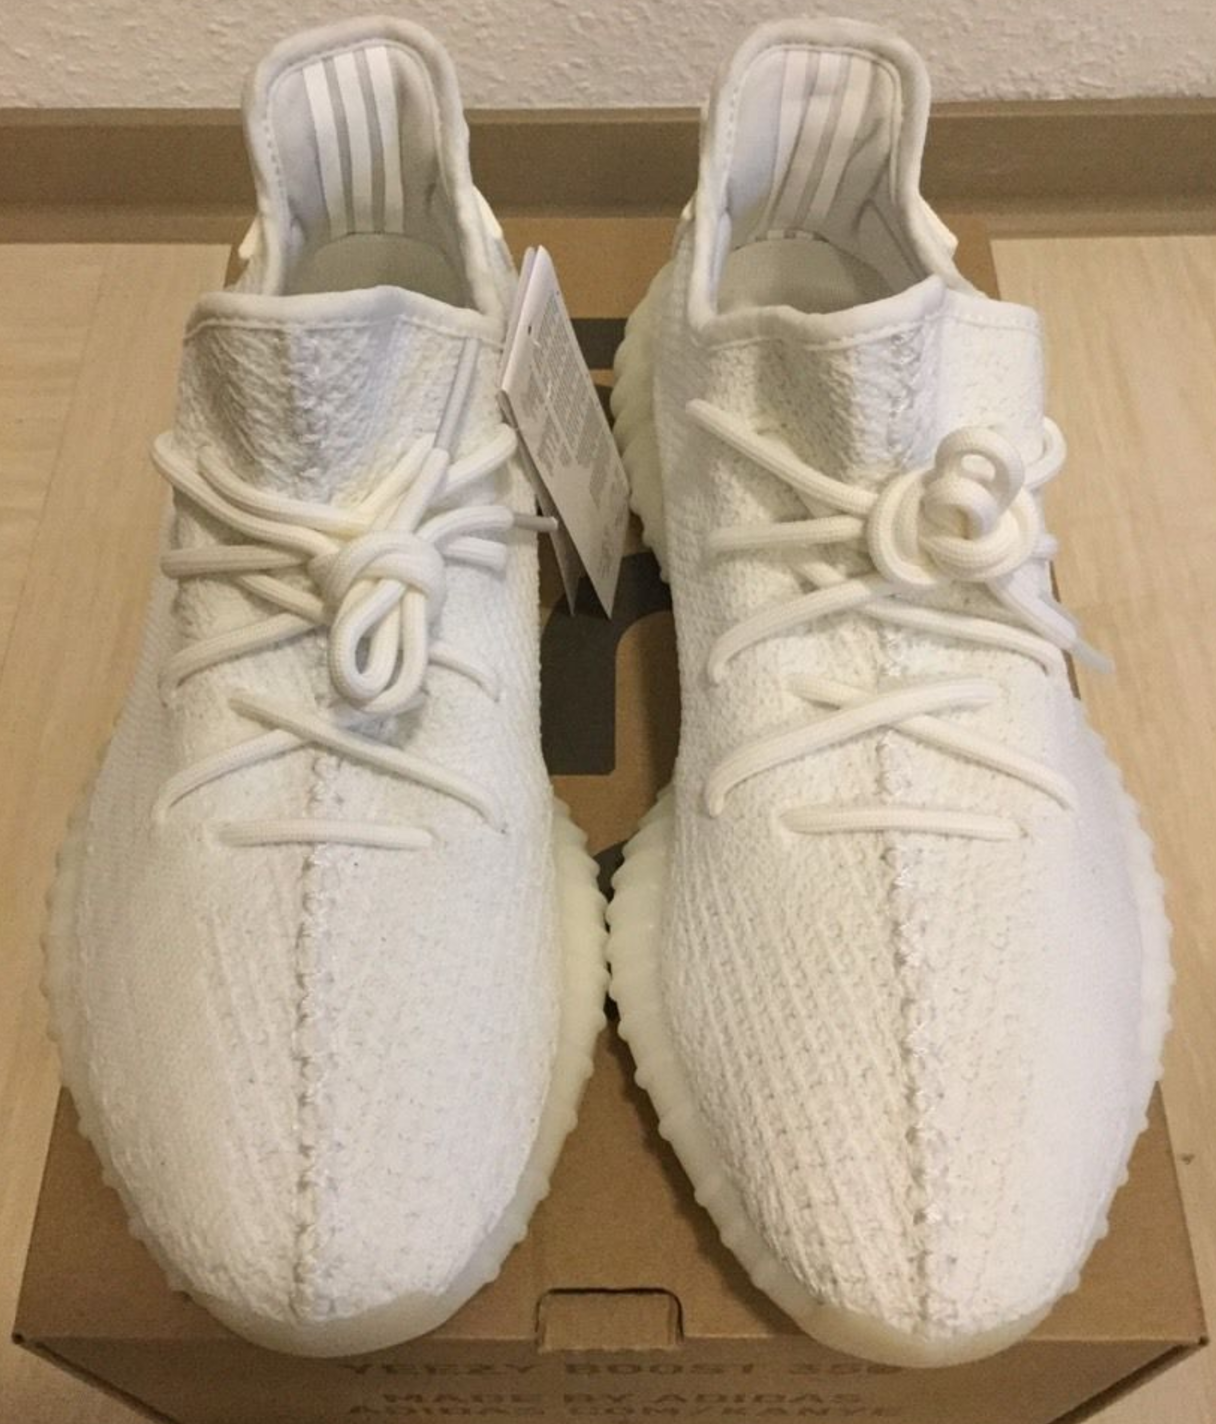 OFFICIAL ADIDAS YEEZY LEGIT CHECK THREAD 350 / 750 / 950 | Page 403